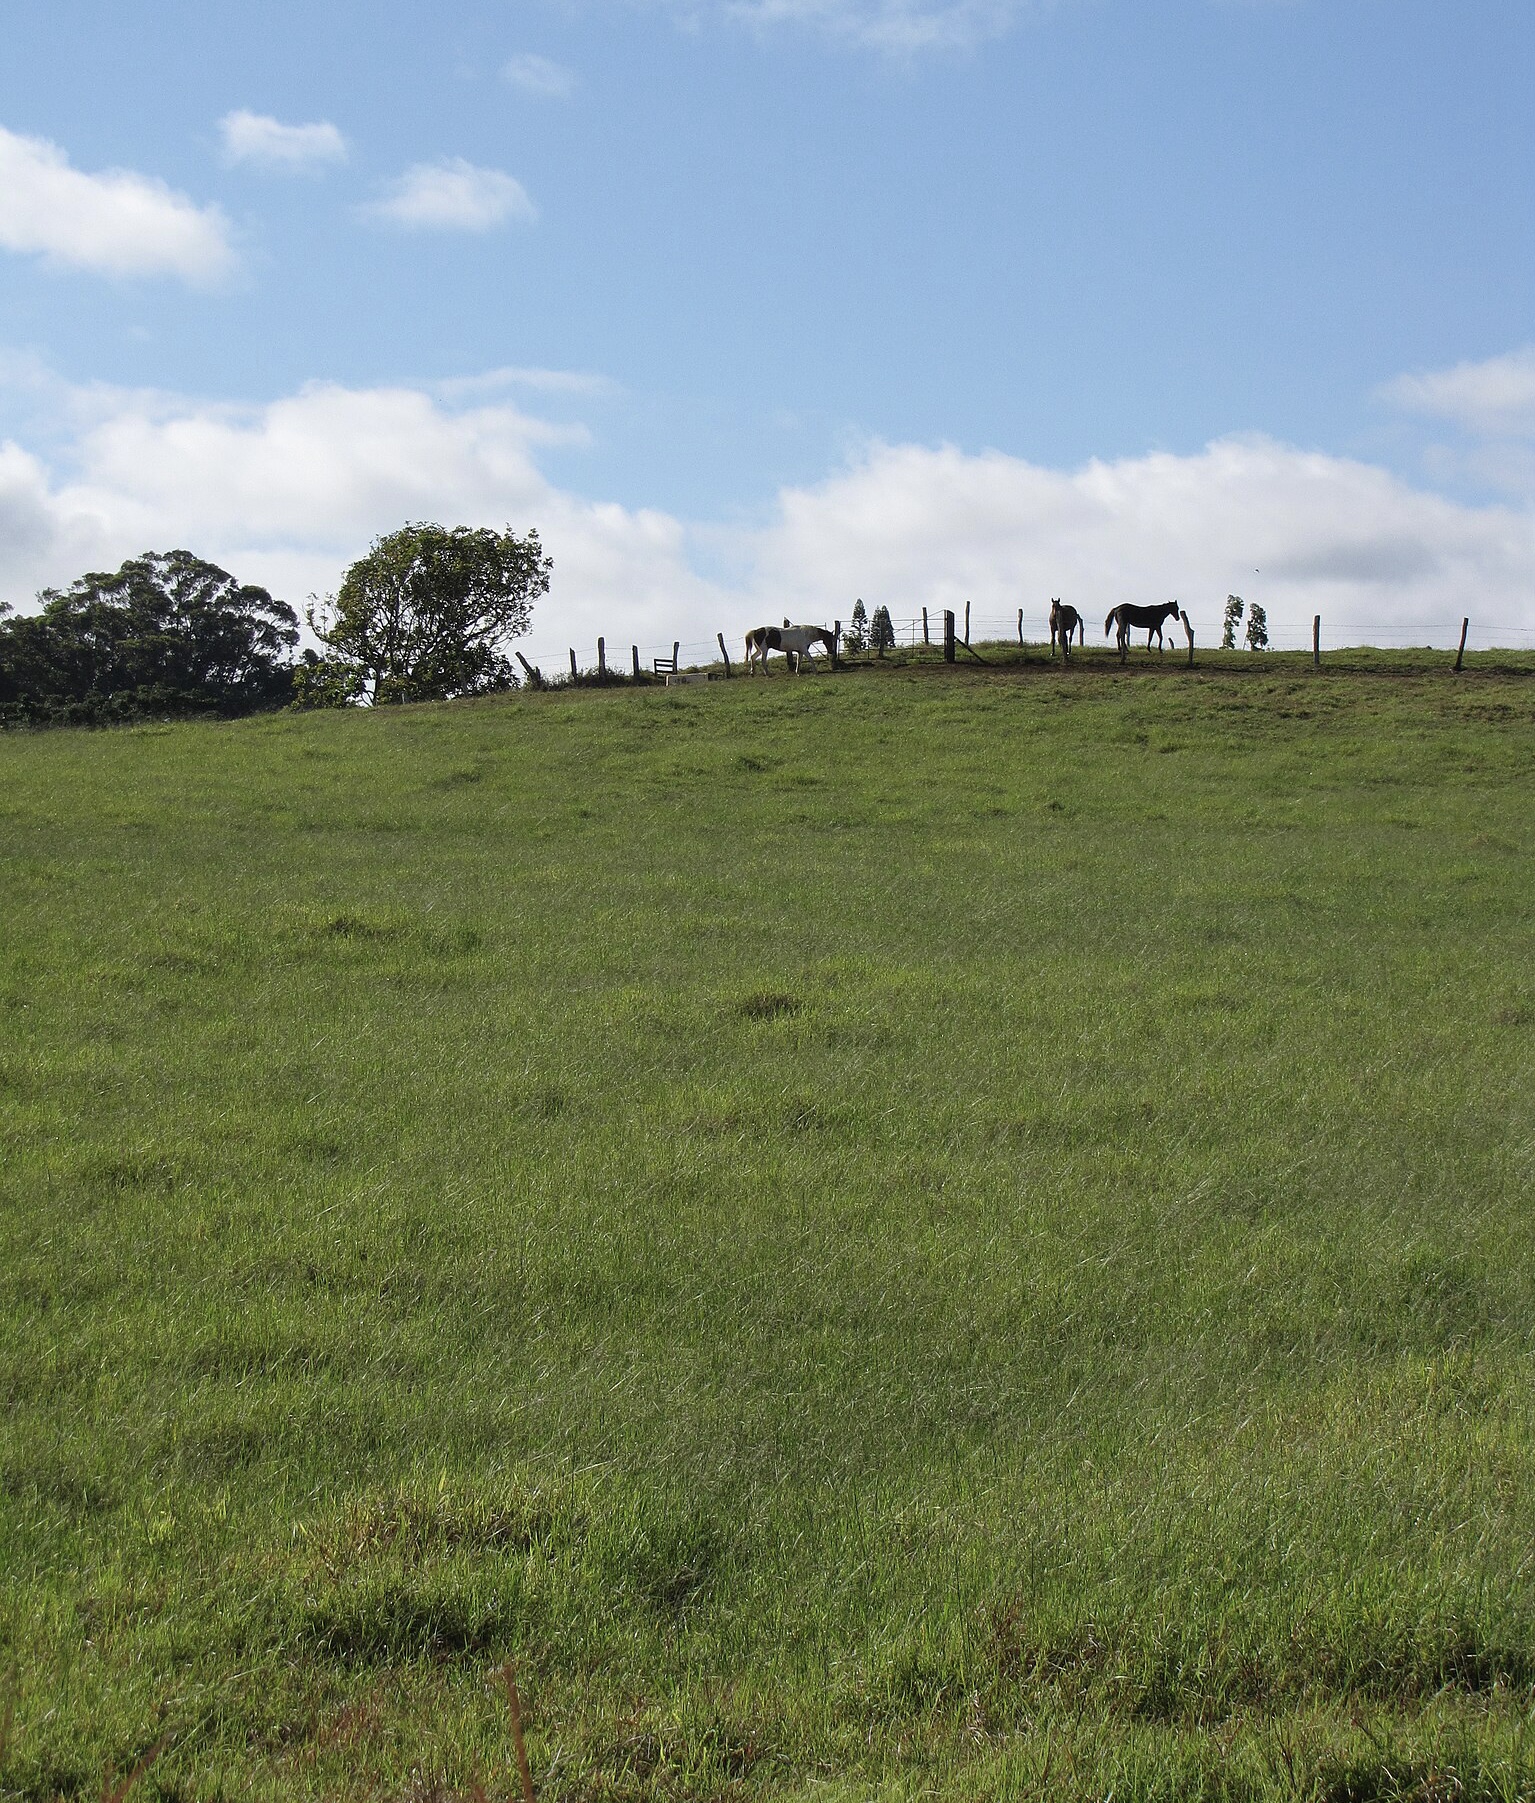 The photo shows three horses on the horizon in a fenced-in a pasture. The pasture is using limpo grass as a forage grass. Maui, Hawaii, the U.S.A.